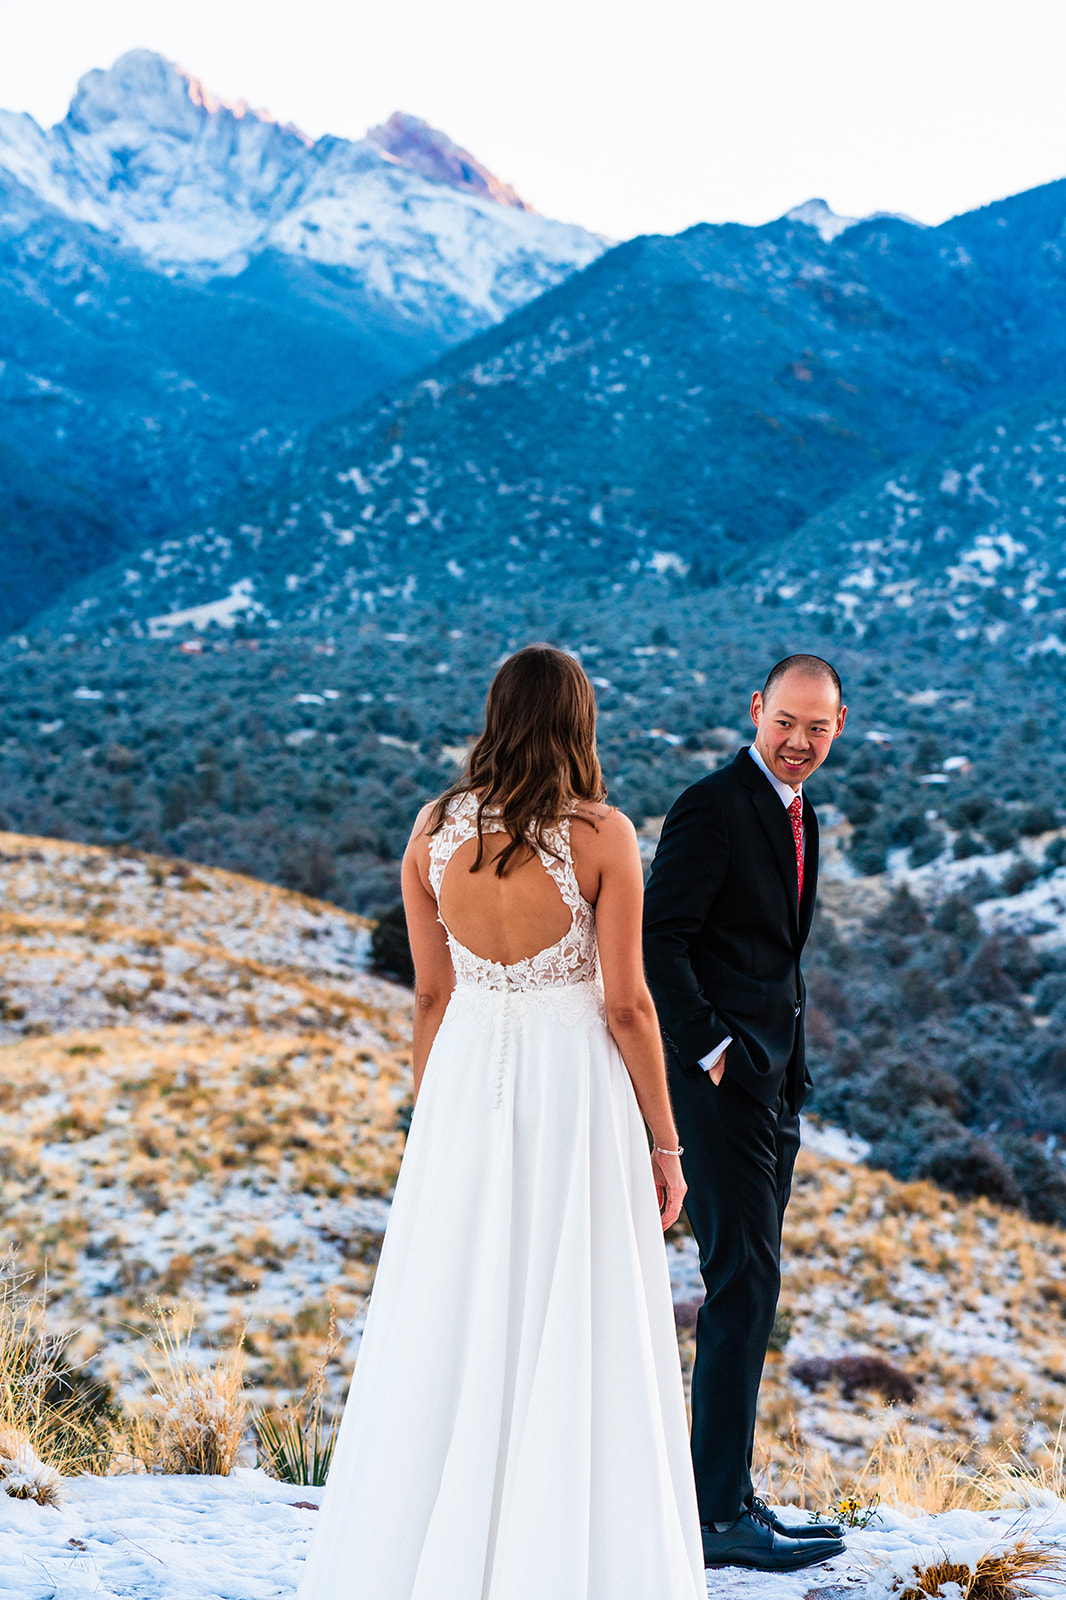 A bride and groom standing in front of a snow covered mountain.